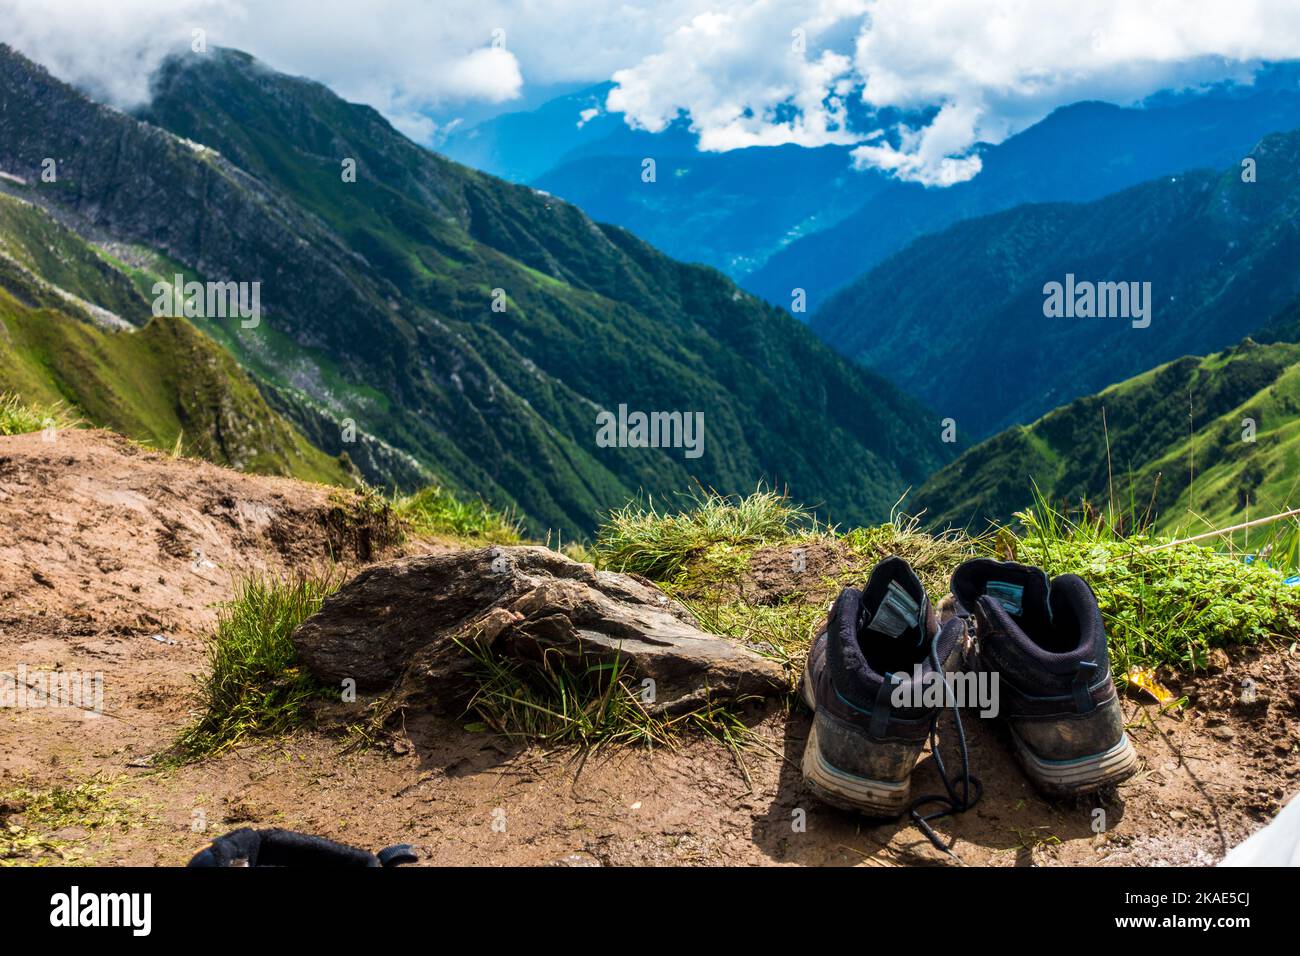 July 14th 2022, Himachal Pradesh India. Pair of trekking shoes and socks on a rock with landscapes and sky in the background. Stock Photo